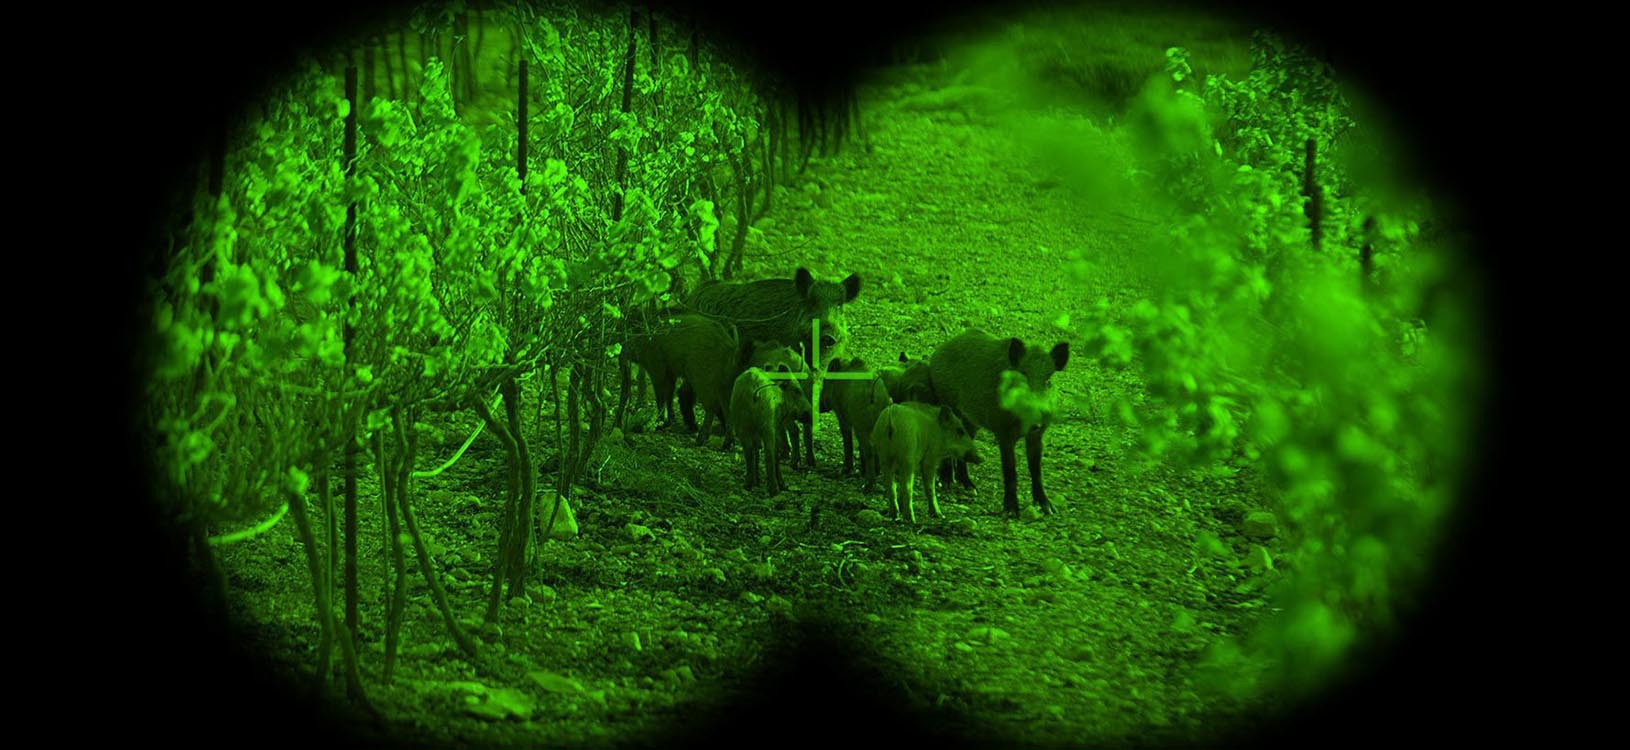 When are night vision goggles useless?